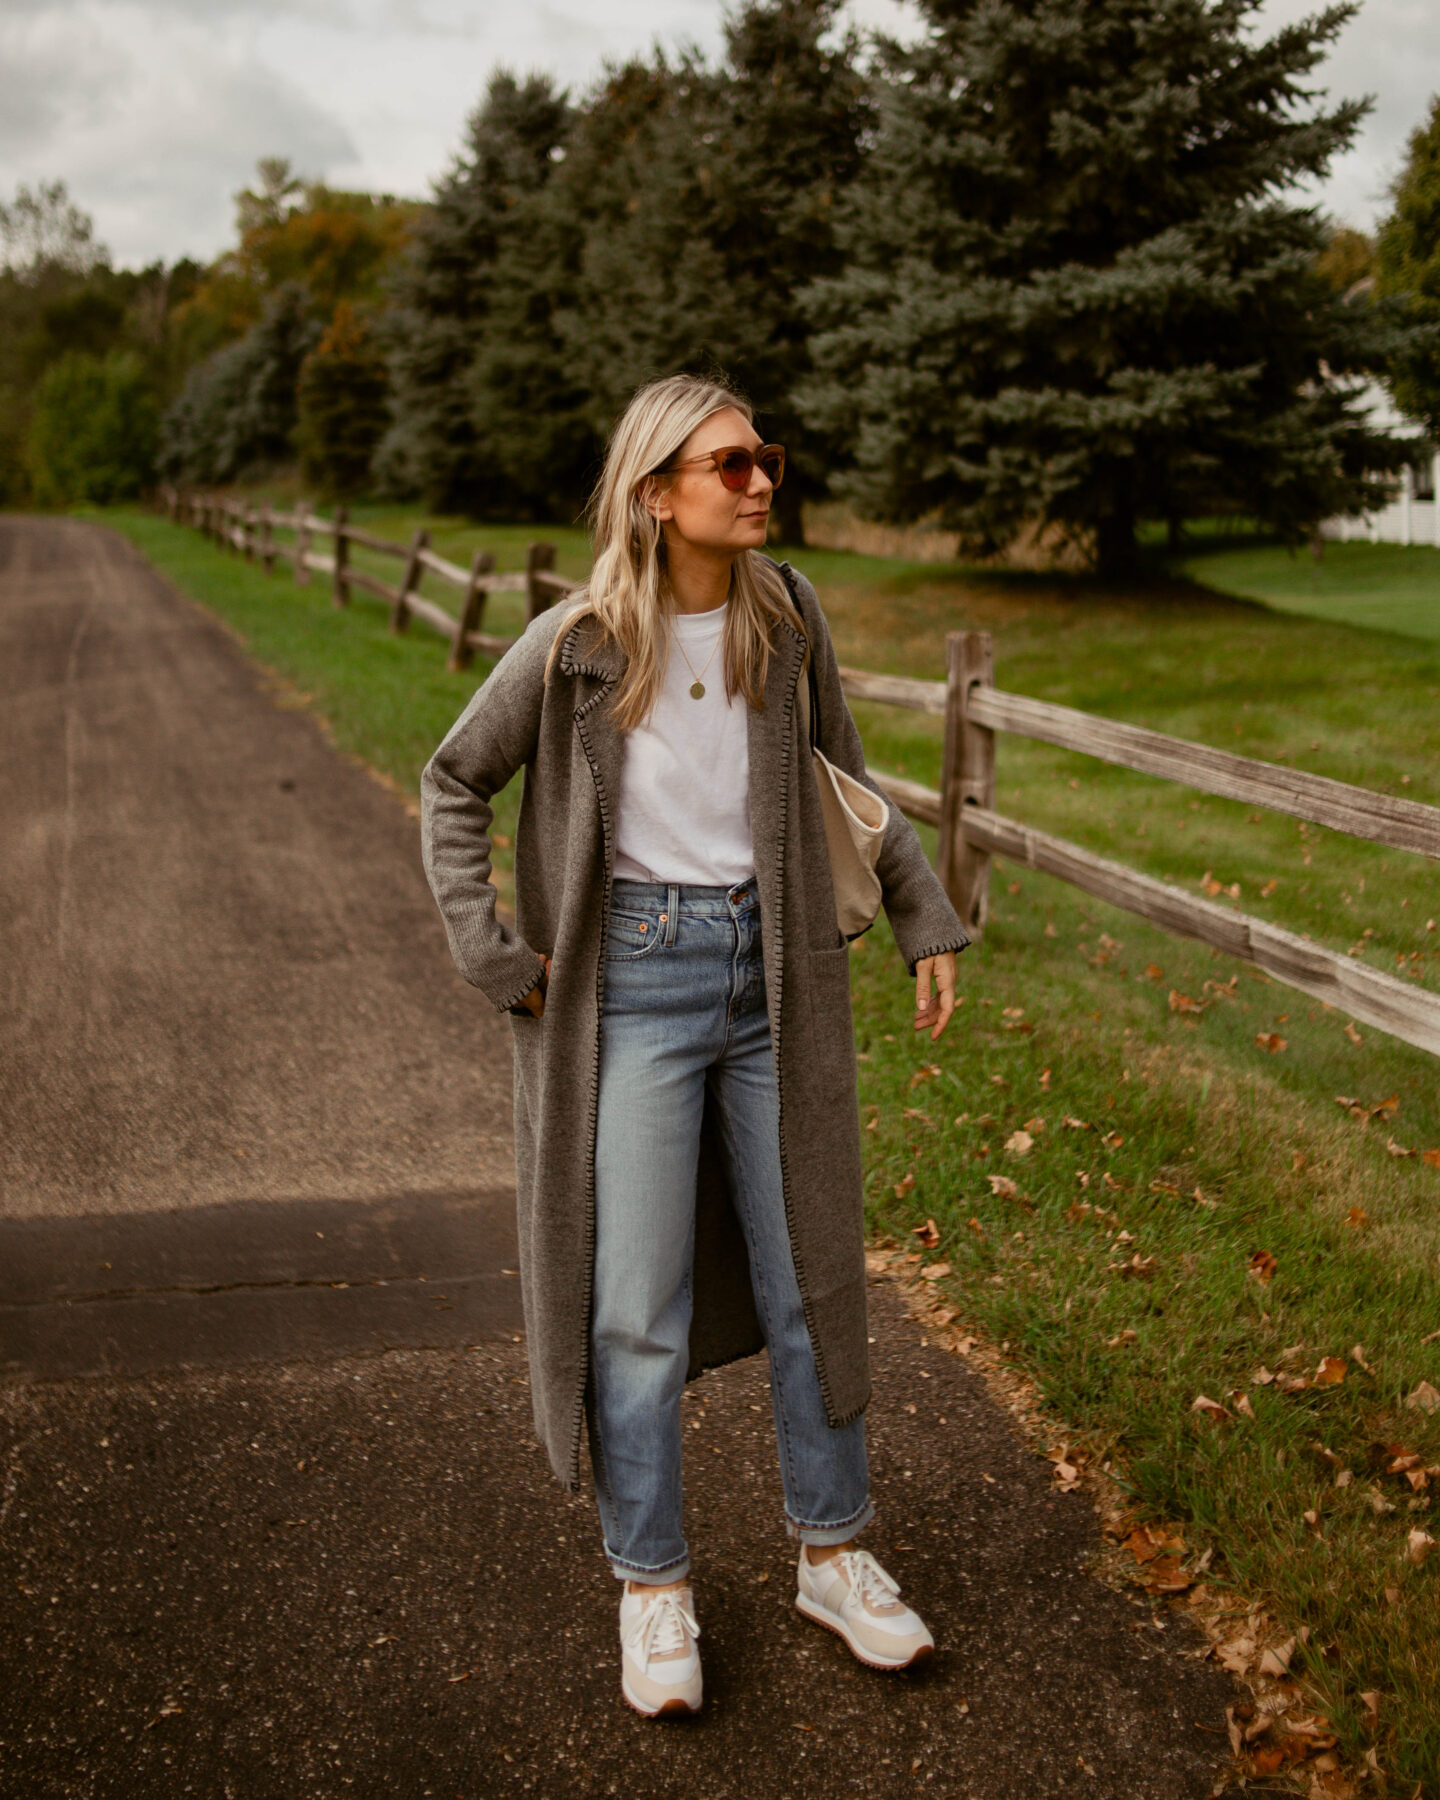 Karin Emily wears a comfy and chic fall outfit: relaxed pair of jeans and an oversized white tee under a gray maxi cardigan